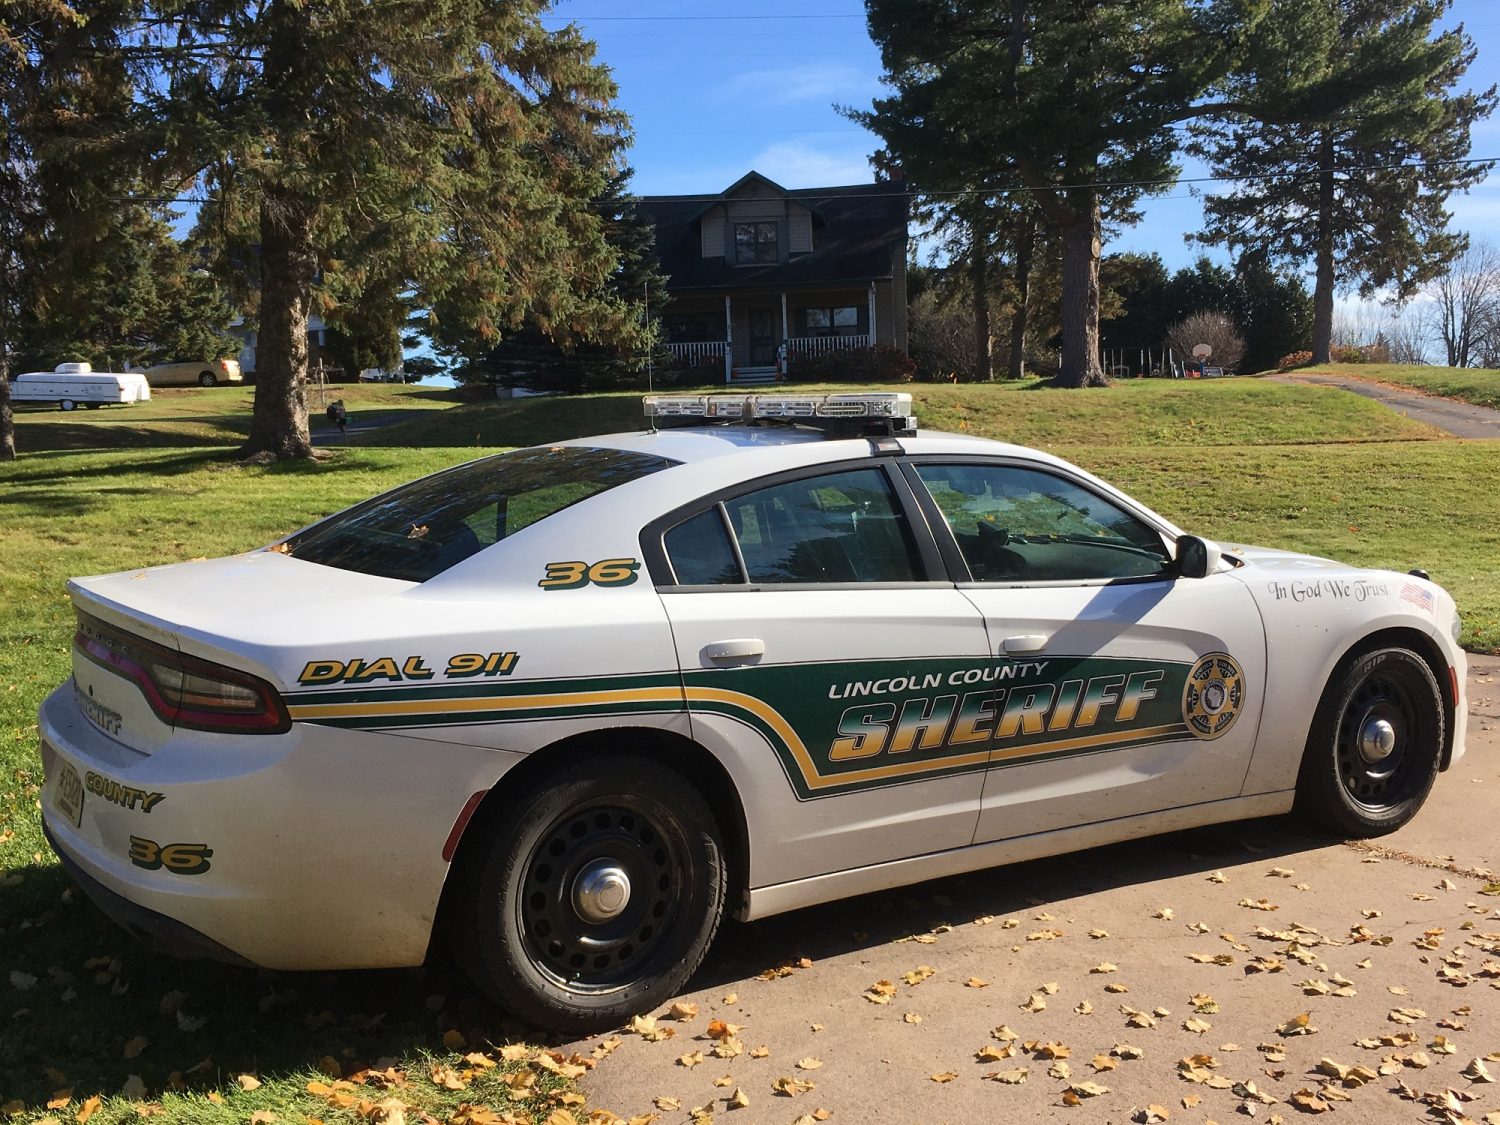 Sheriff’s Office completes ‘take home squad’ initiative